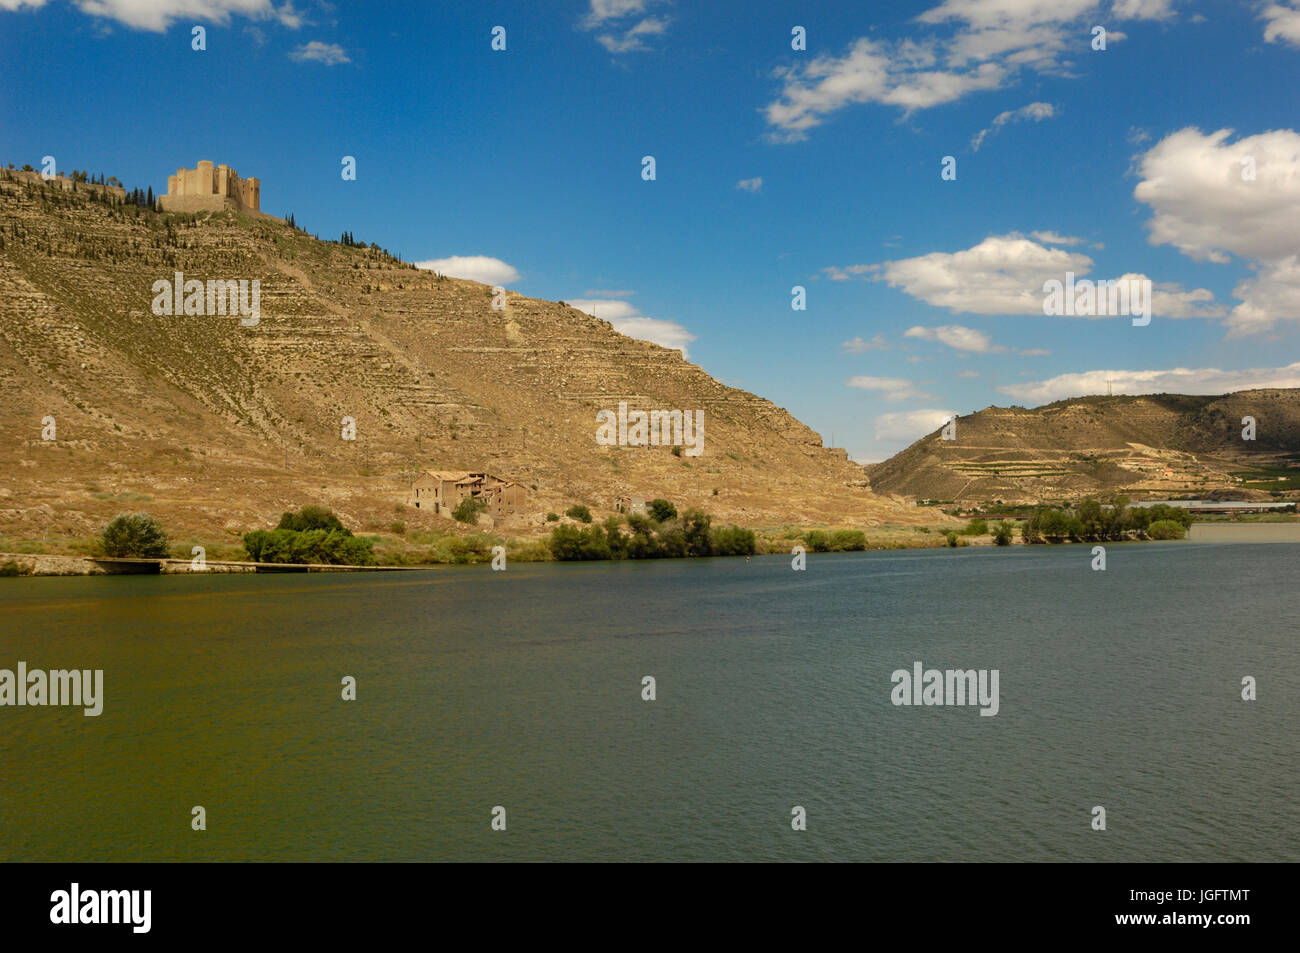 Castle and reservoir of Mequinenza and river Ebro, Zaragoza province, Aragon, Spain Stock Photo